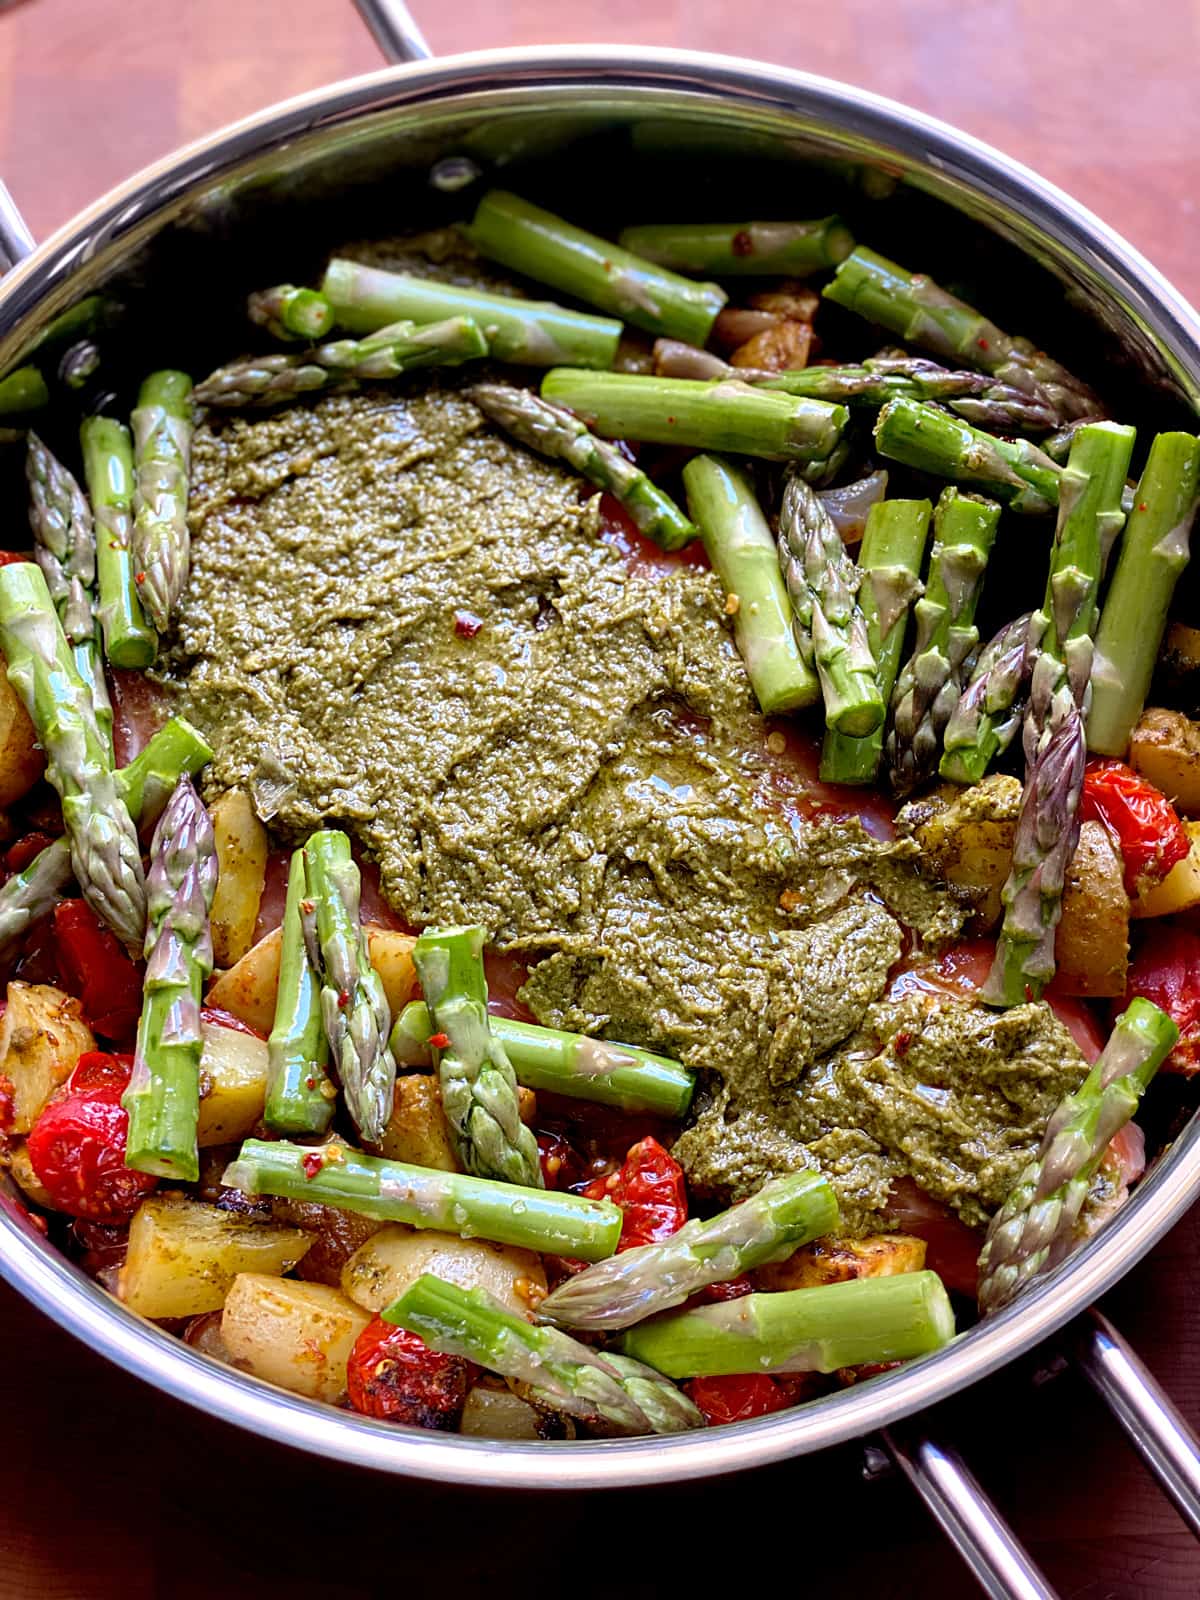 A salmon fillet covered with pesto sauce surrounded with cherry tomatoes, potatoes and asparagus in a baking pan.